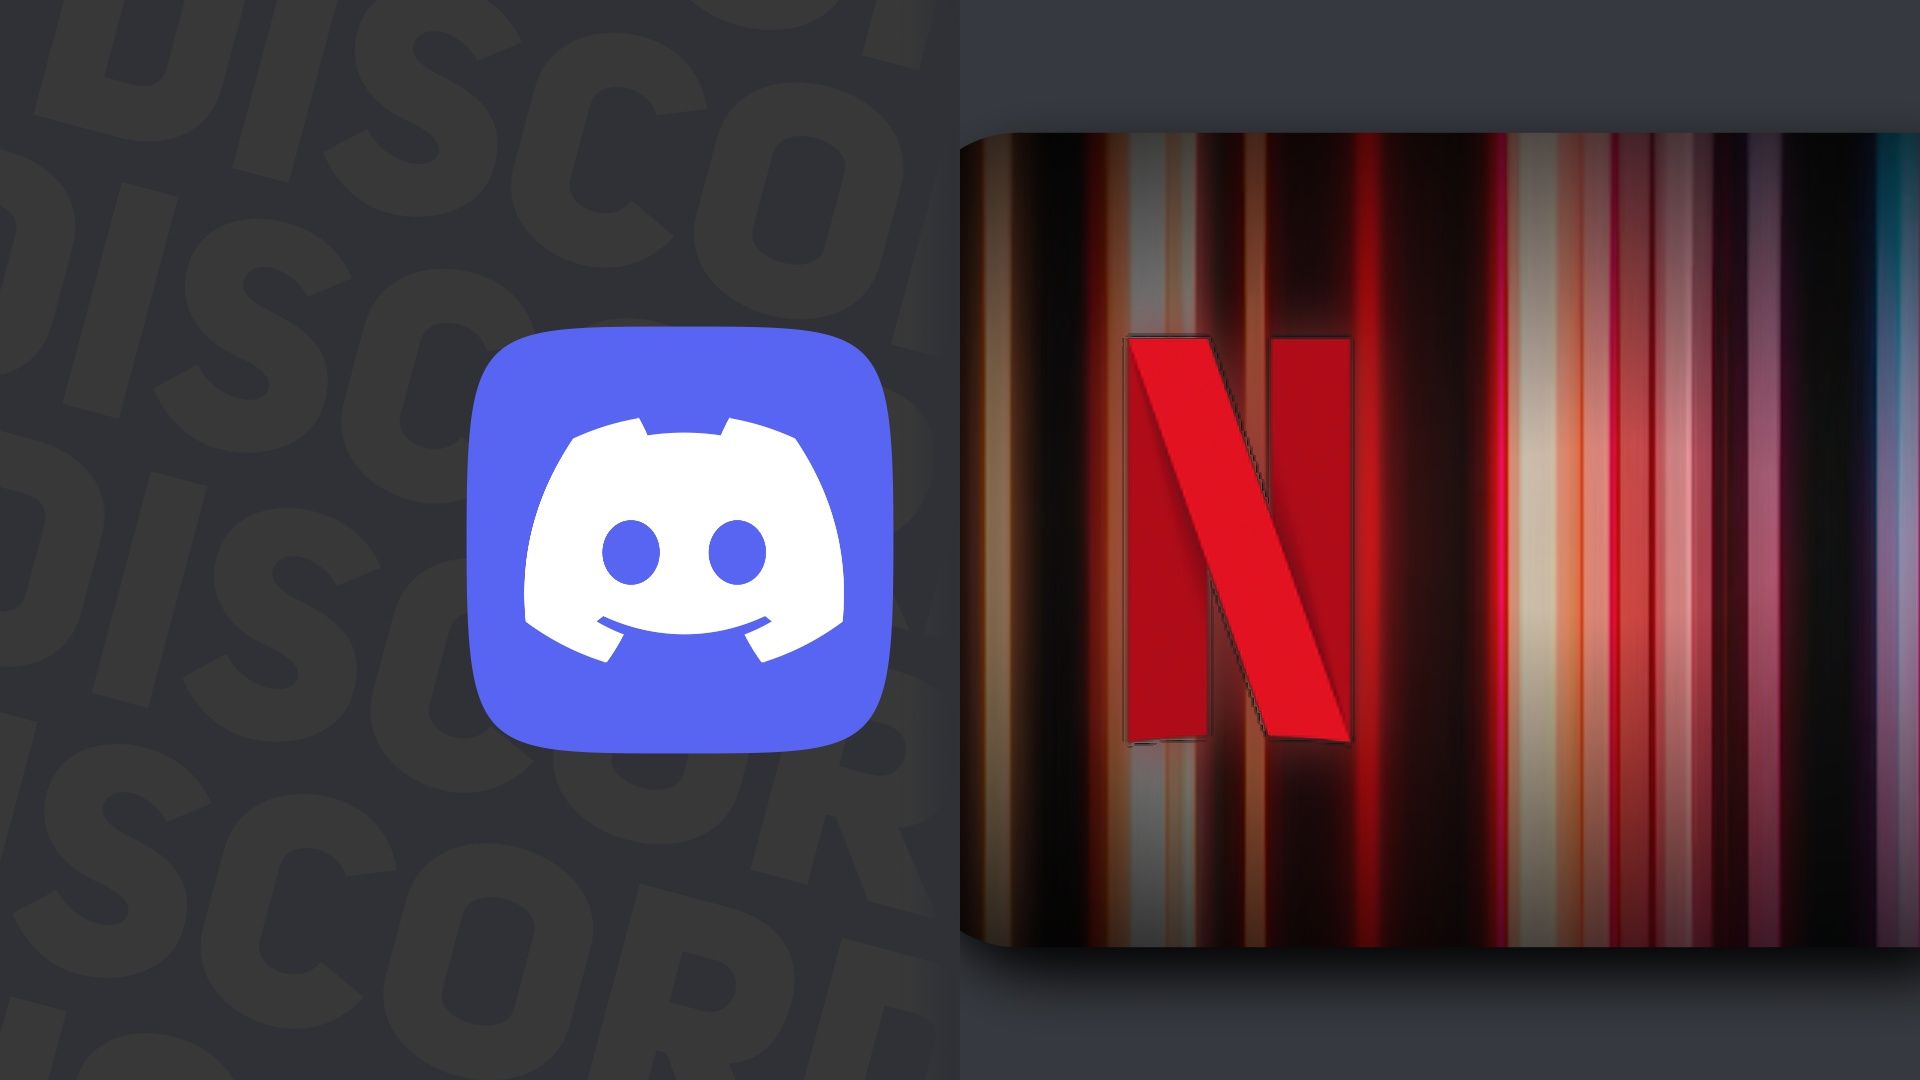 The Discord logo placed next to the Netflix logo